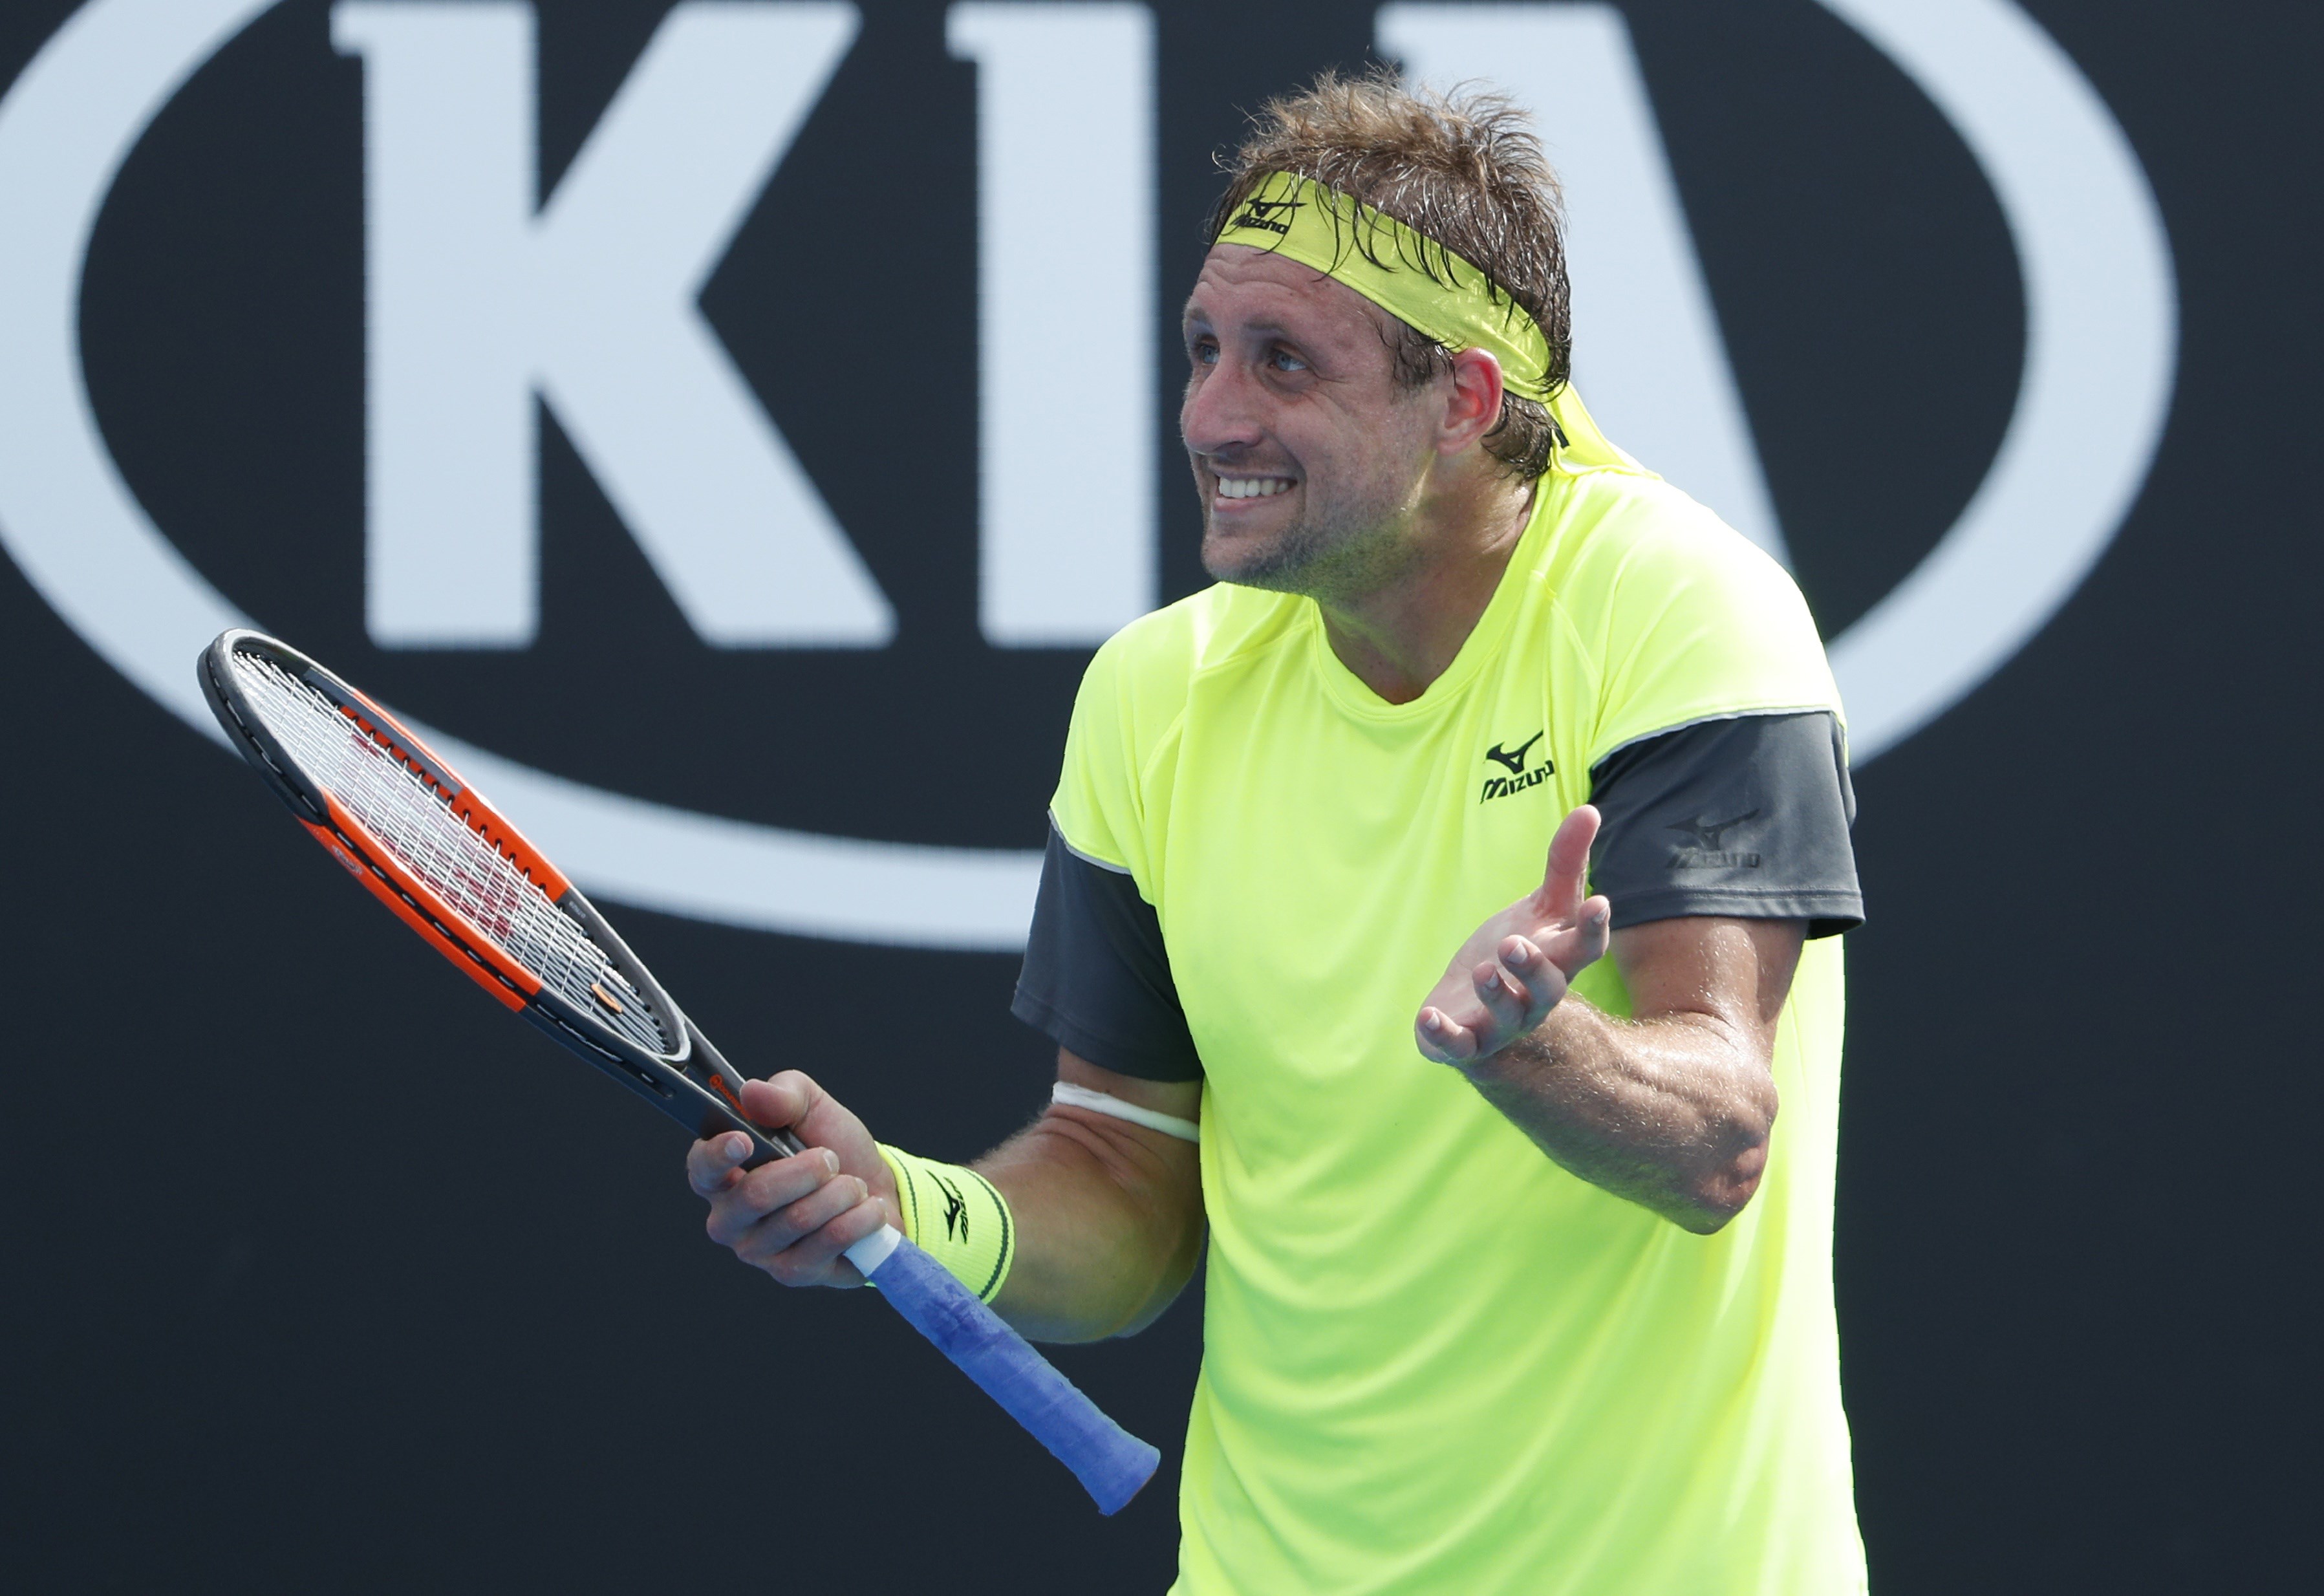 Tennis: Last American standing, Sandgren stoked with 'silly' run